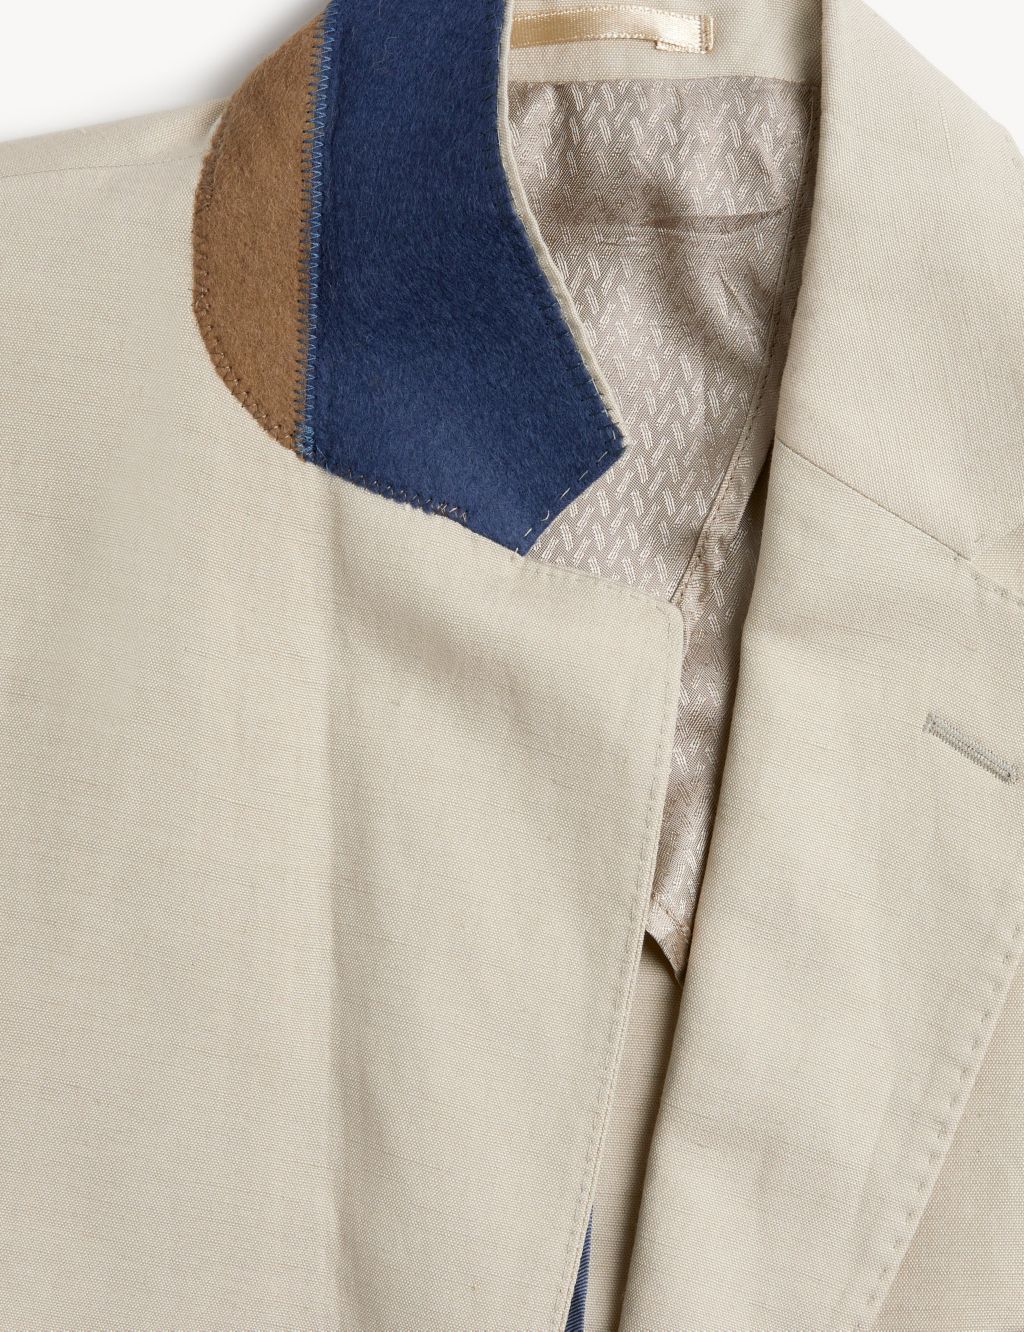 Tailored Fit Italian Silk And Linen Jacket image 3